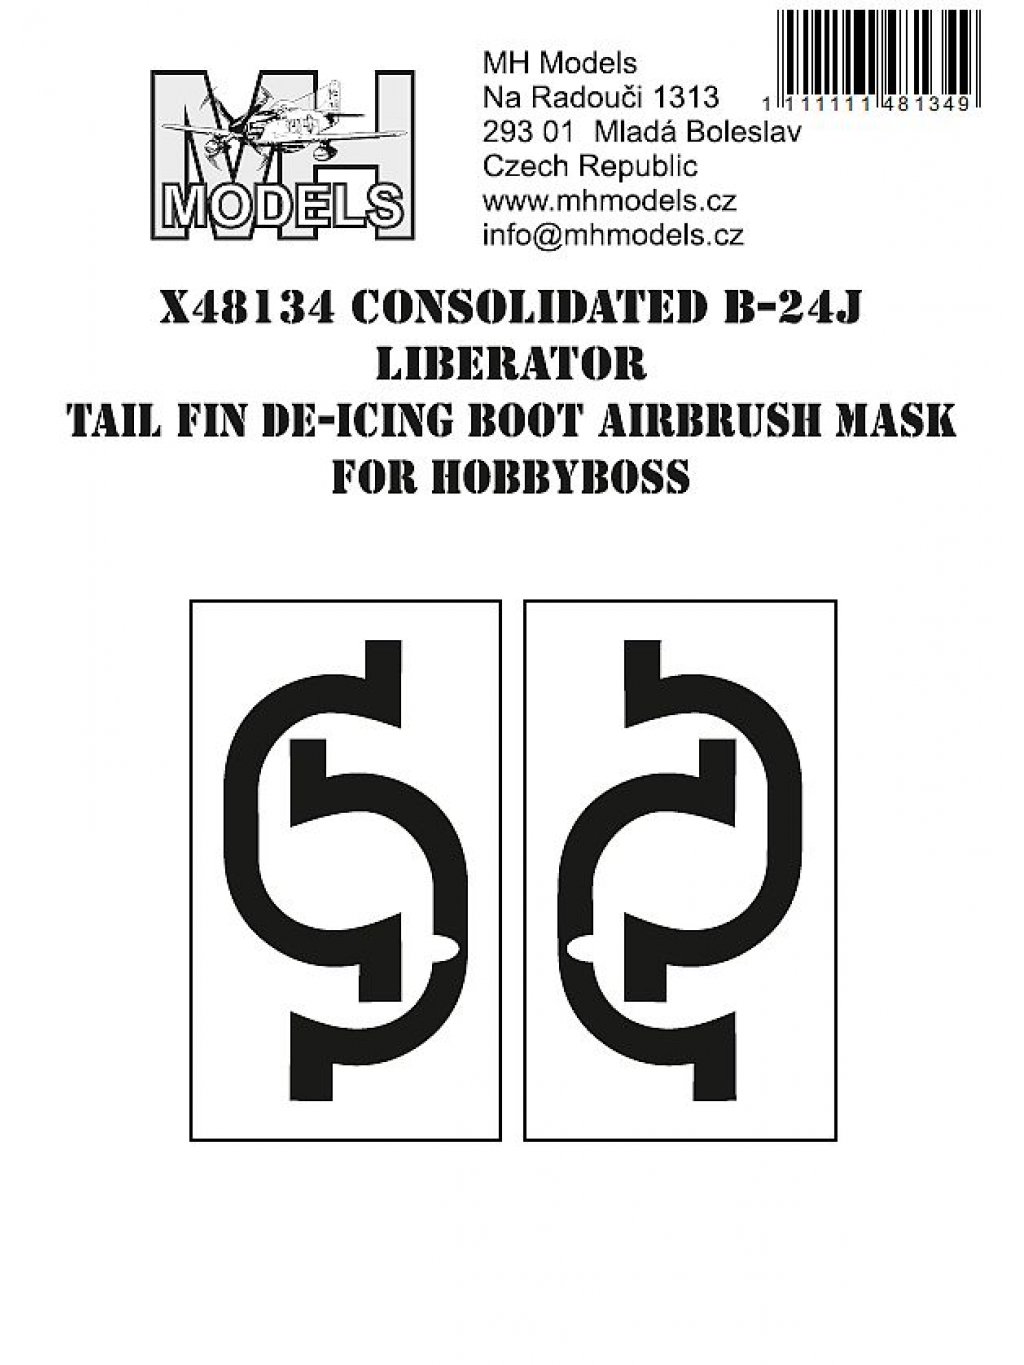 Consolidated B-24J Liberator Tail Fin De-icing Boot airbrush mask for Hobbyboss